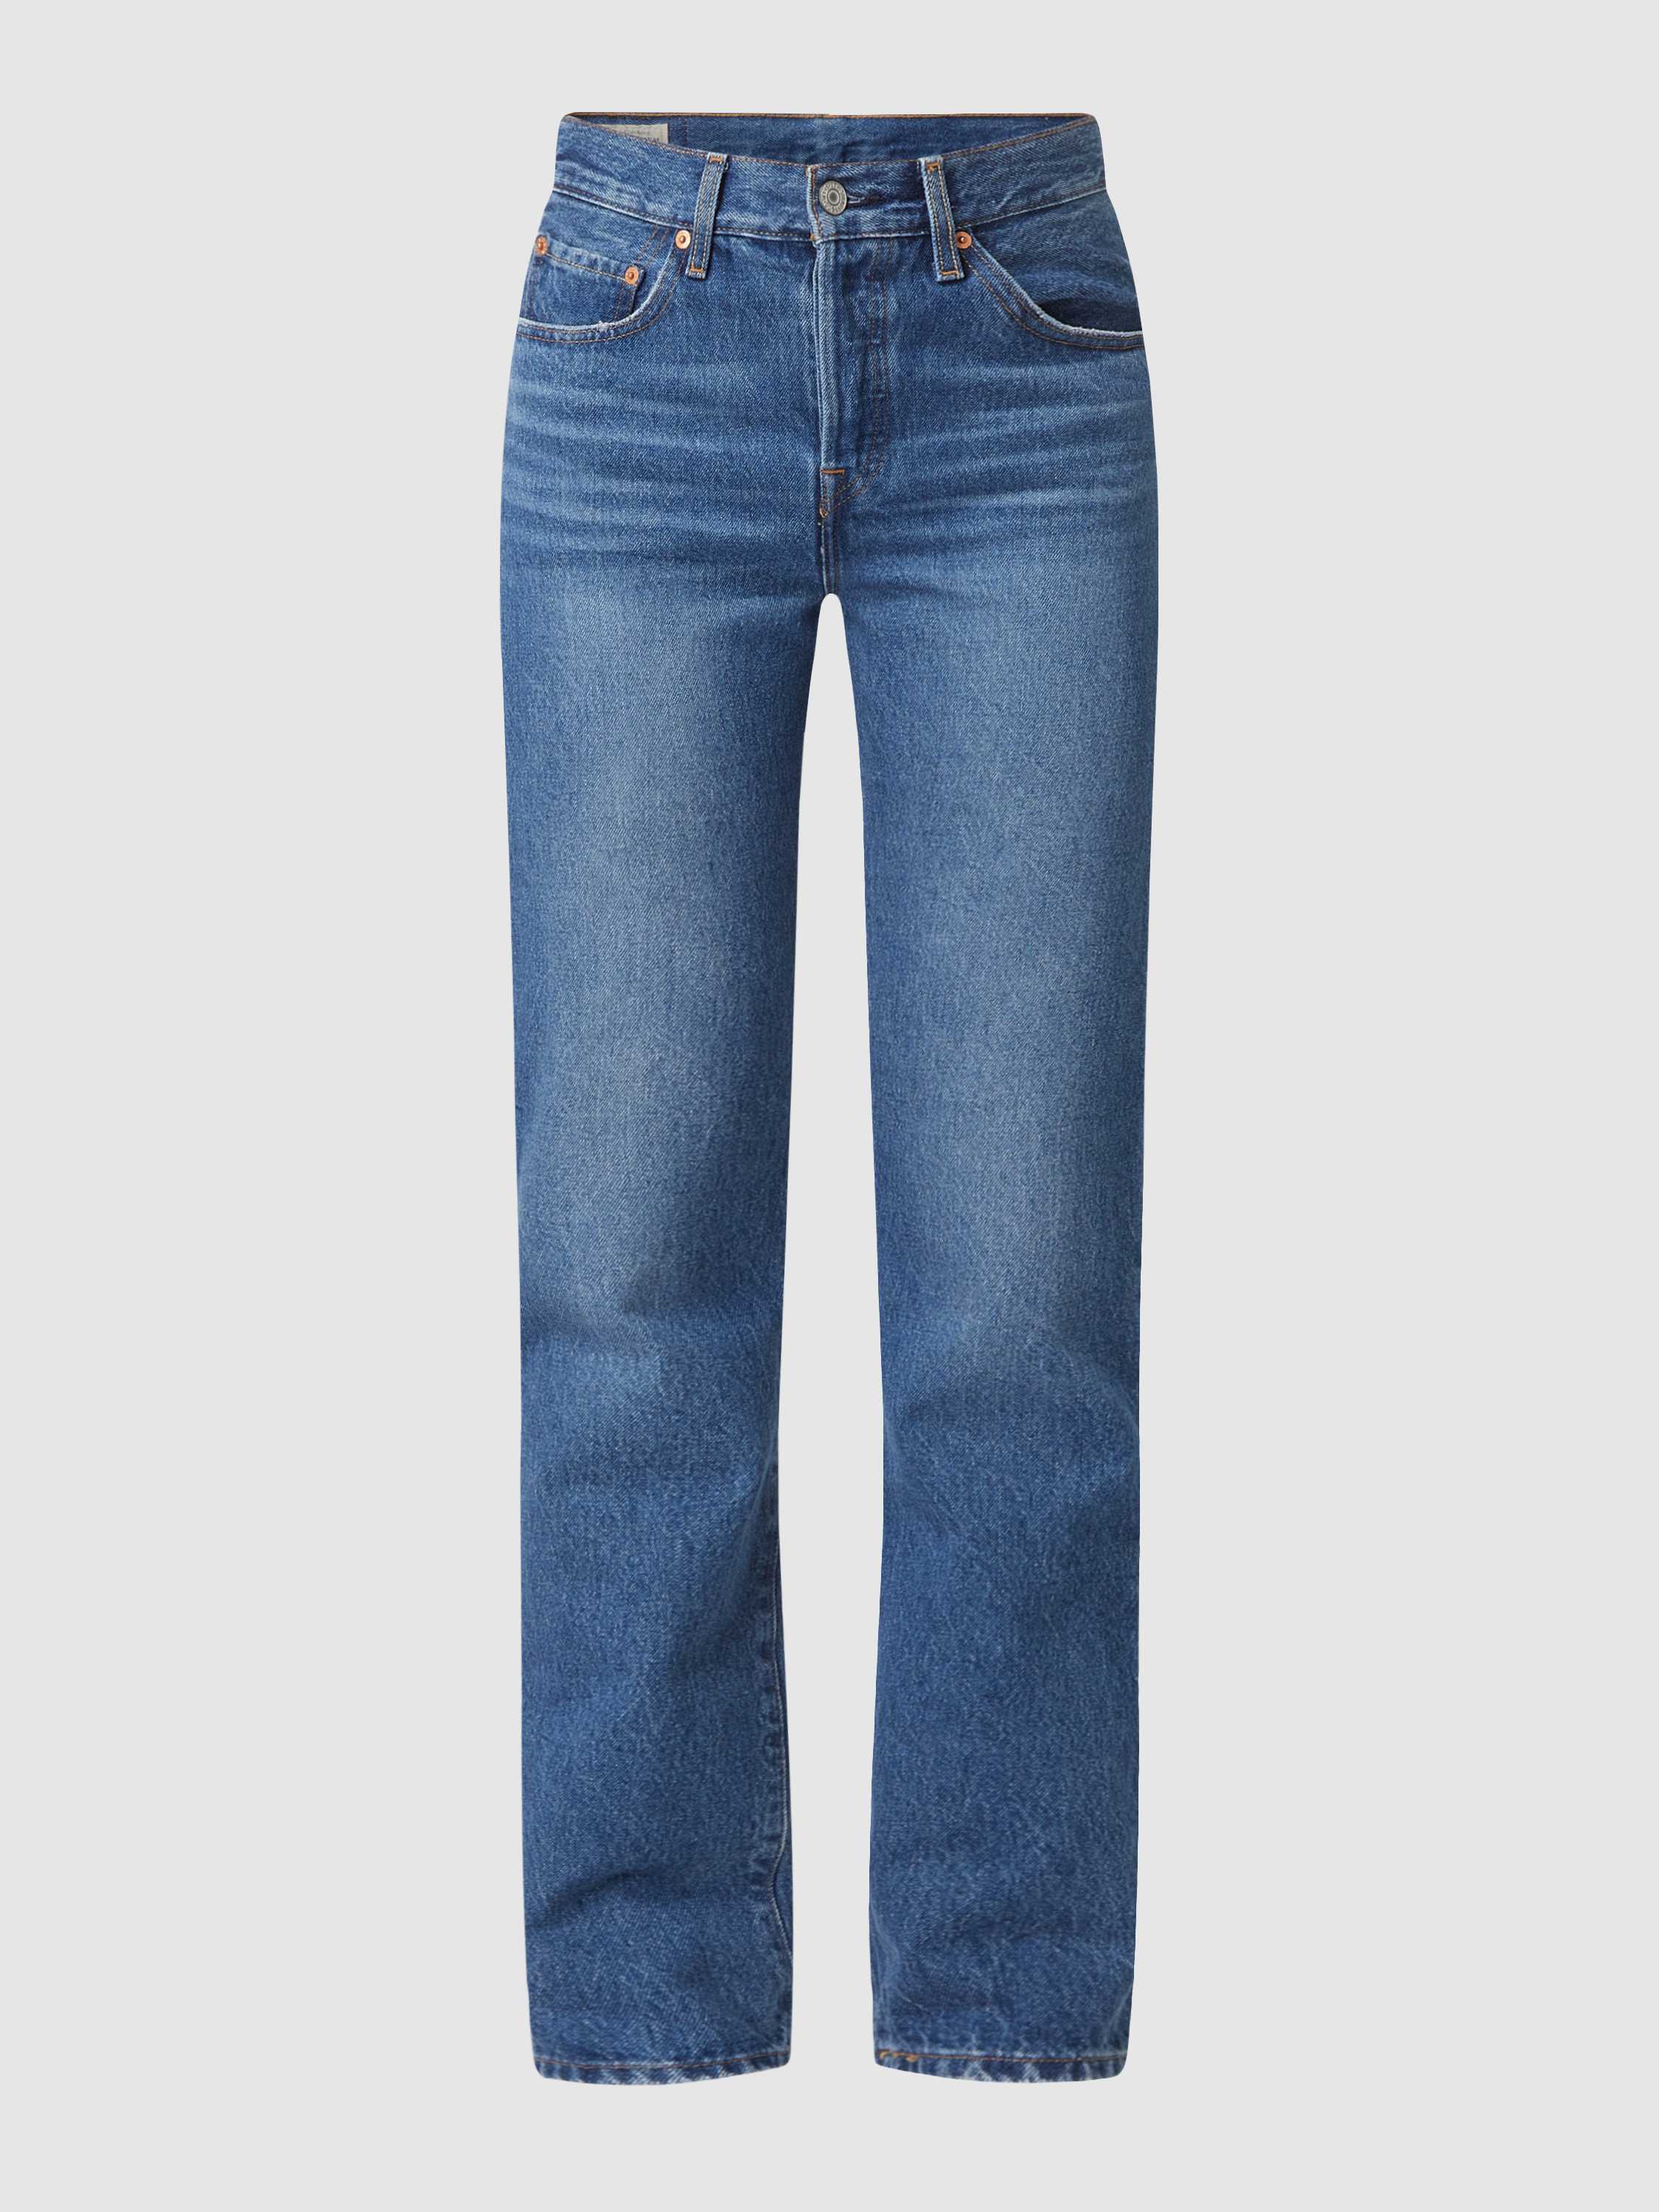 Straight Fit Jeans aus Baumwolle Modell '501' - ‘Water<Less™’